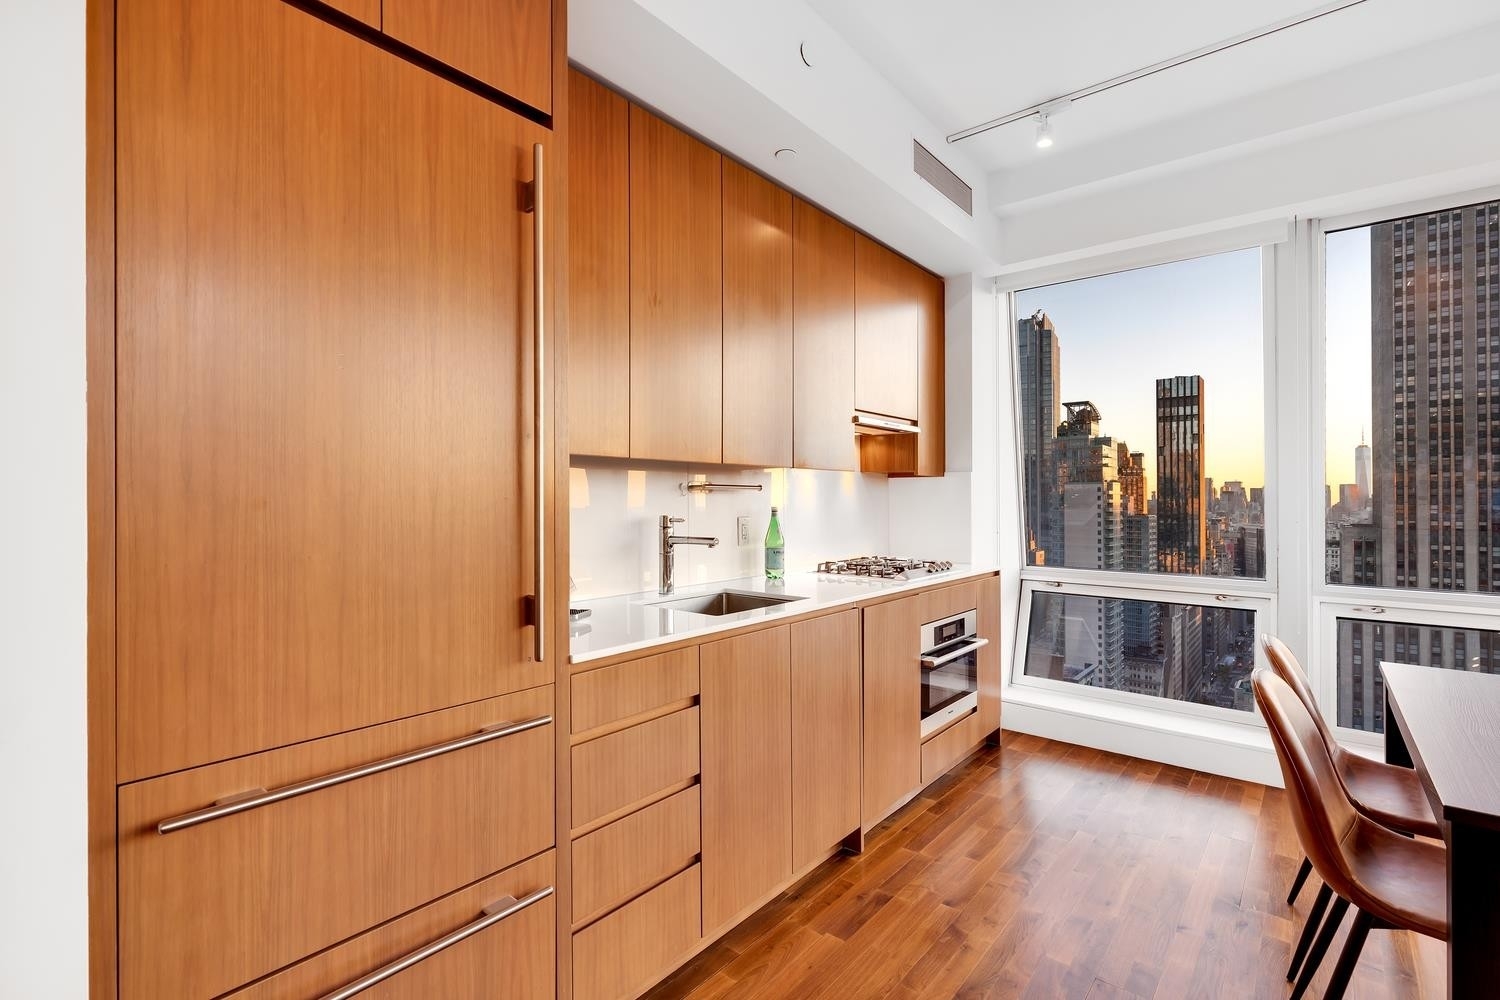 2. Rentals at Residences-Langham, 400 FIFTH AVE, 38H New York